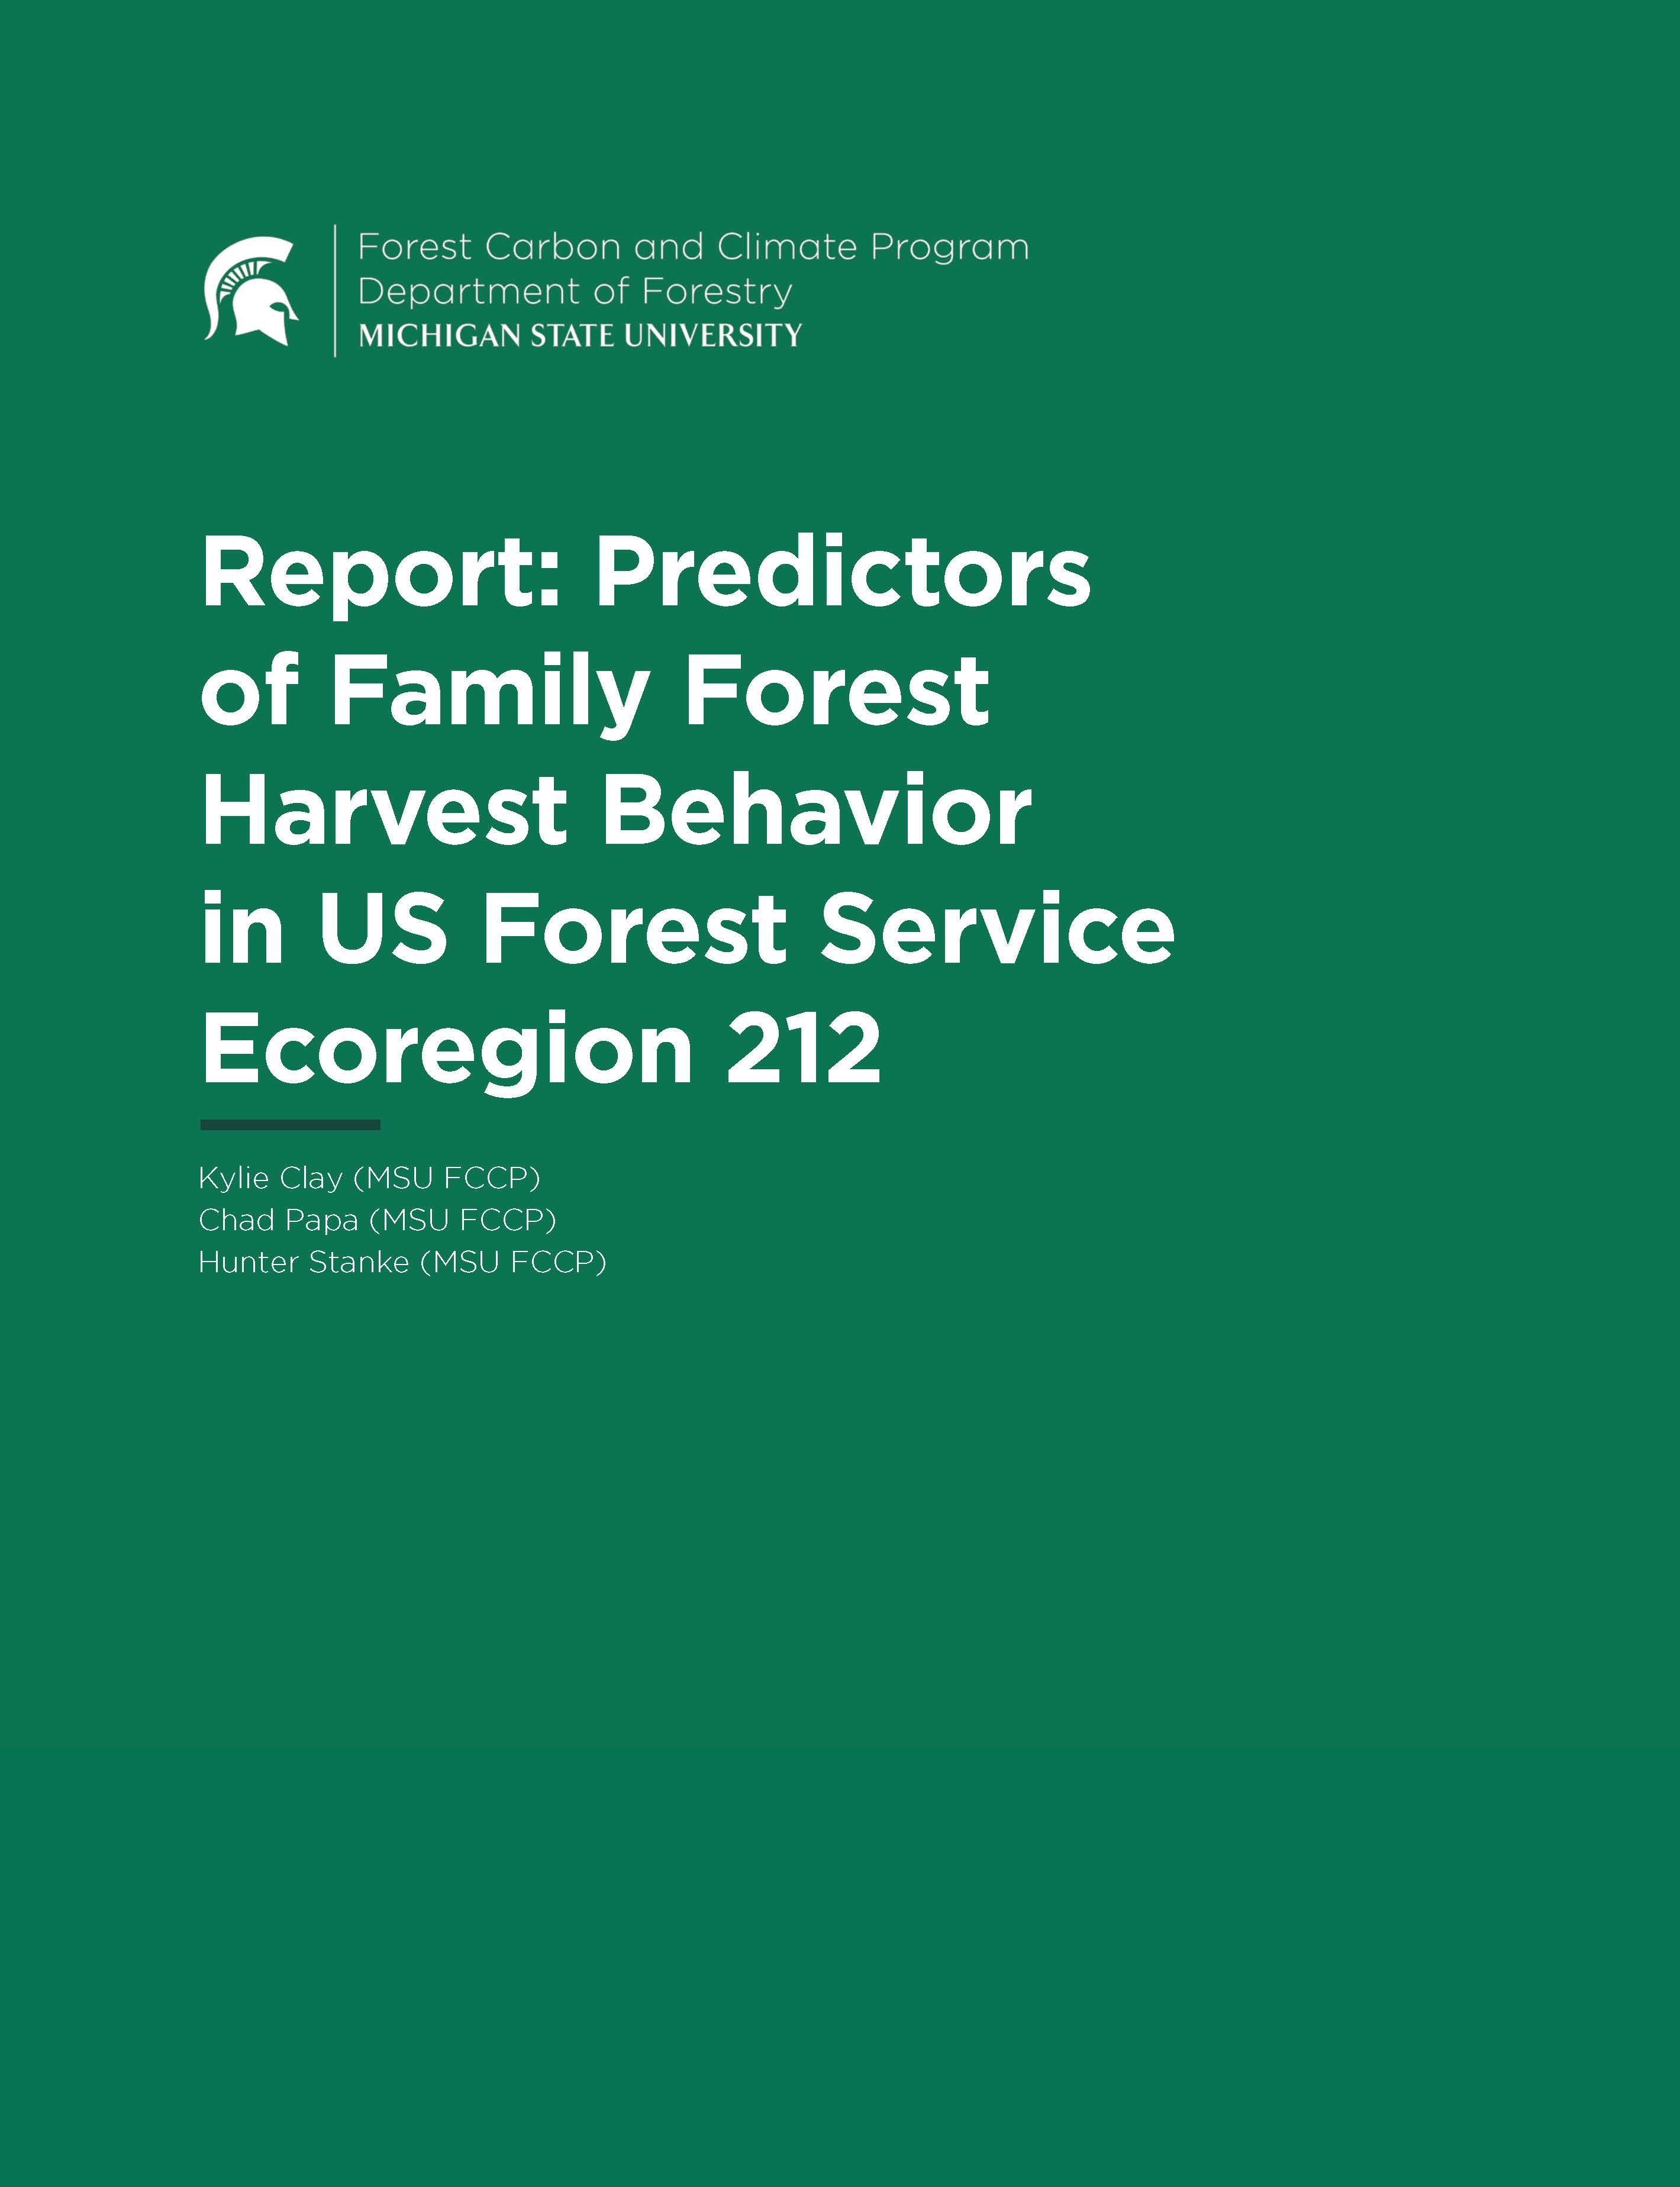 Report: Predictors of Family Forest Harvest Likelihood and Intensity in USFS Ecoregion 212